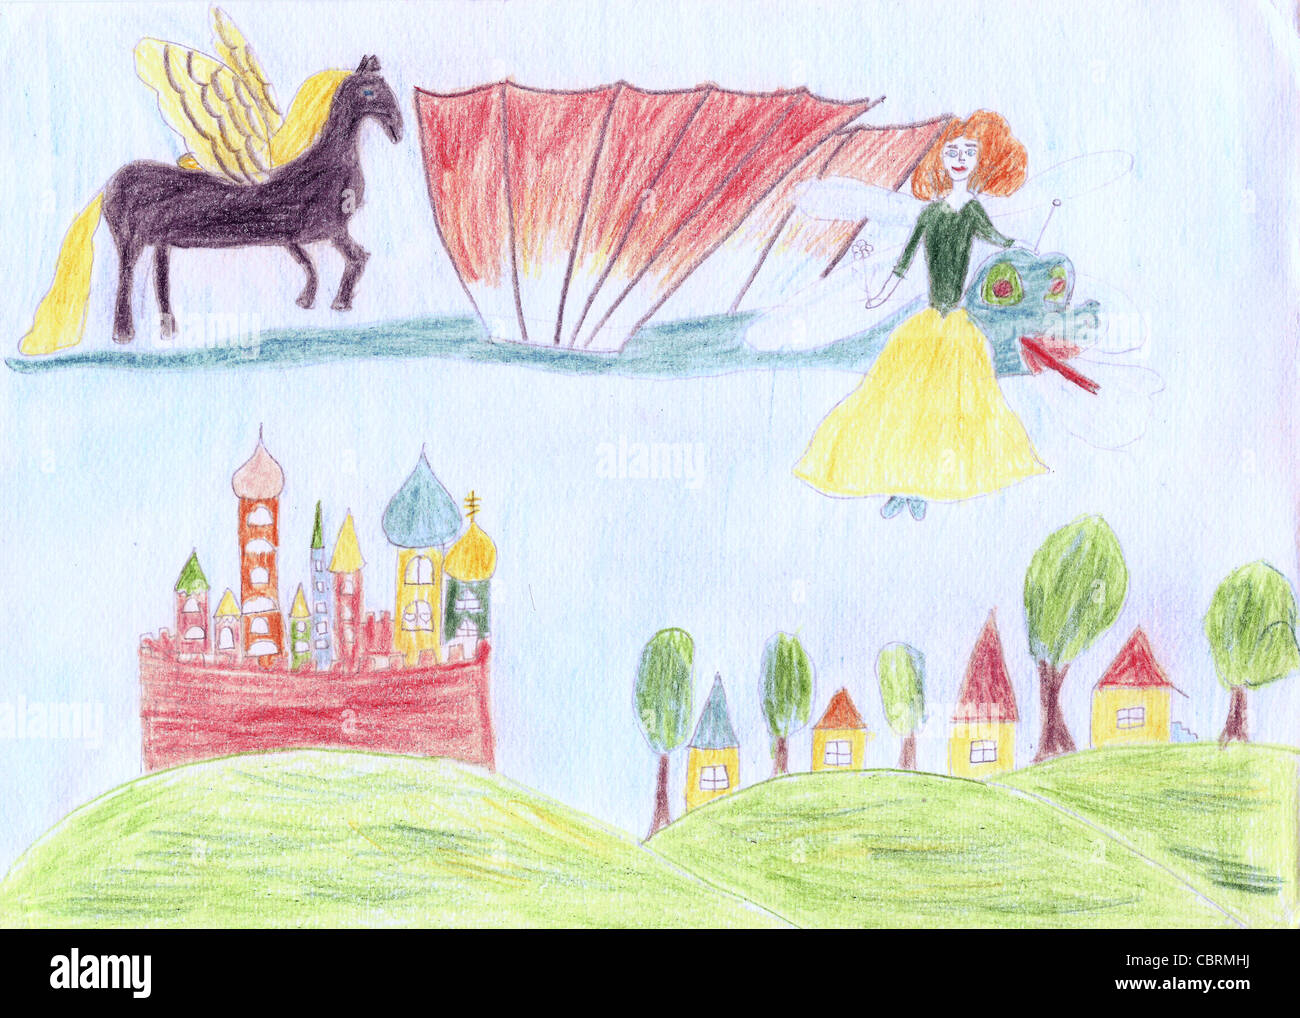 child draw pencils illustration with flying dragon, horse, fairy above the ground with trees, houses and colorful castle Stock Photo